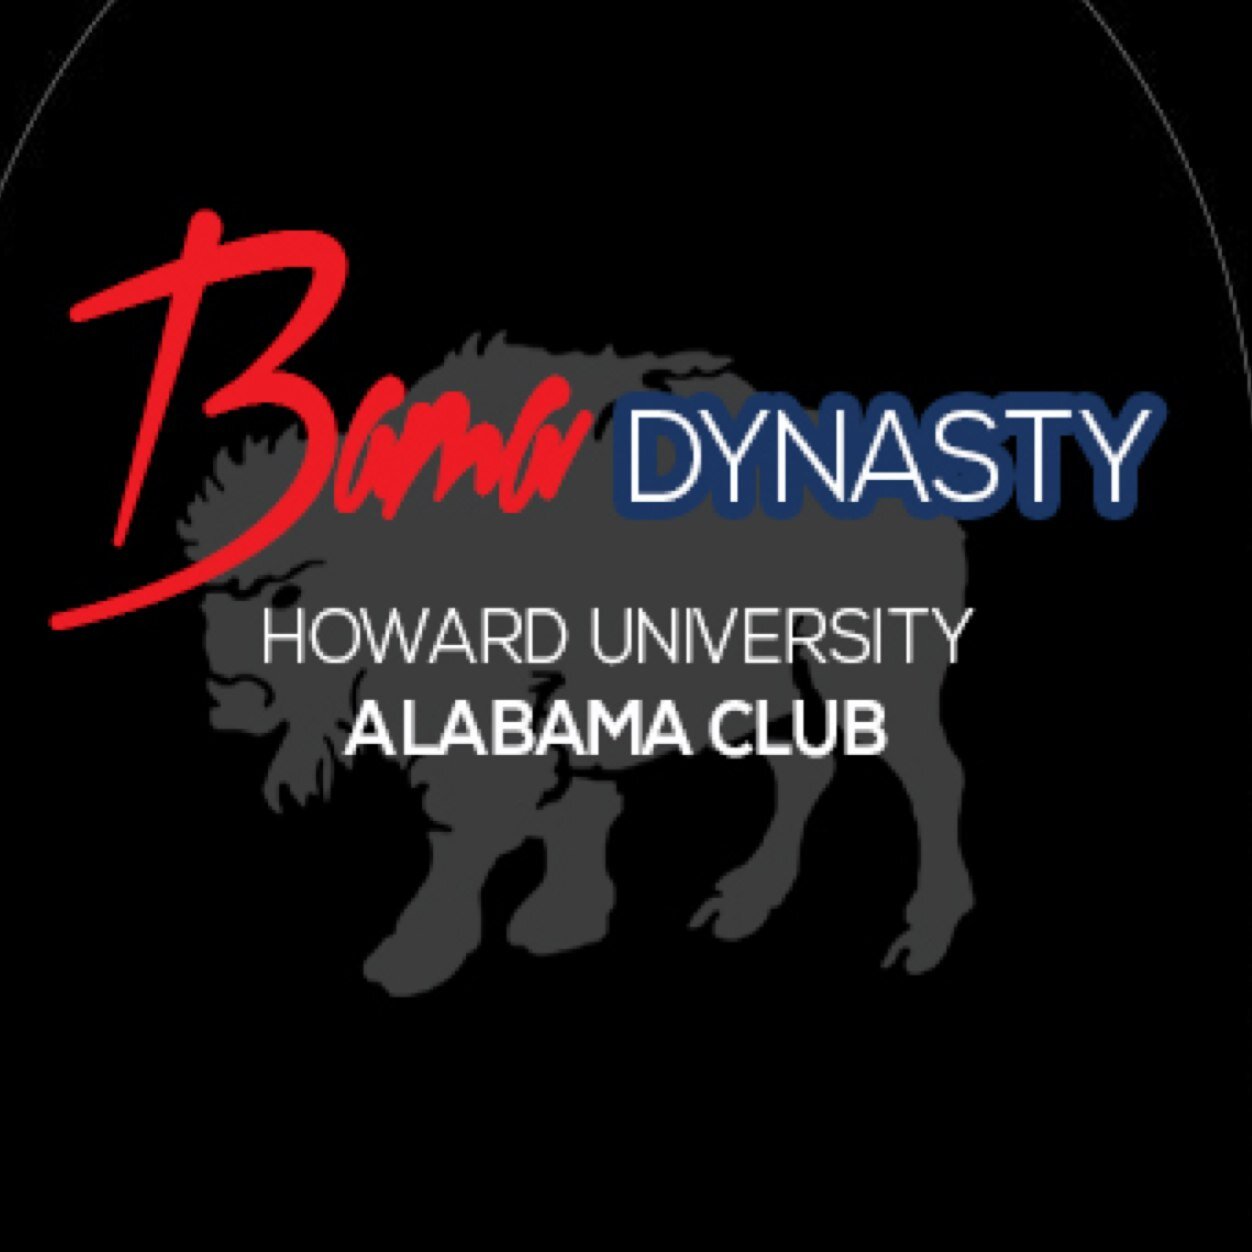 Howard University Alabama Club!!! KEEPING YOU INFORMED! CONNECTING EVERYONE FROM EVERYWHERE!! Go Bison! FOLLOW BACK!!
hualabama@gmail.com